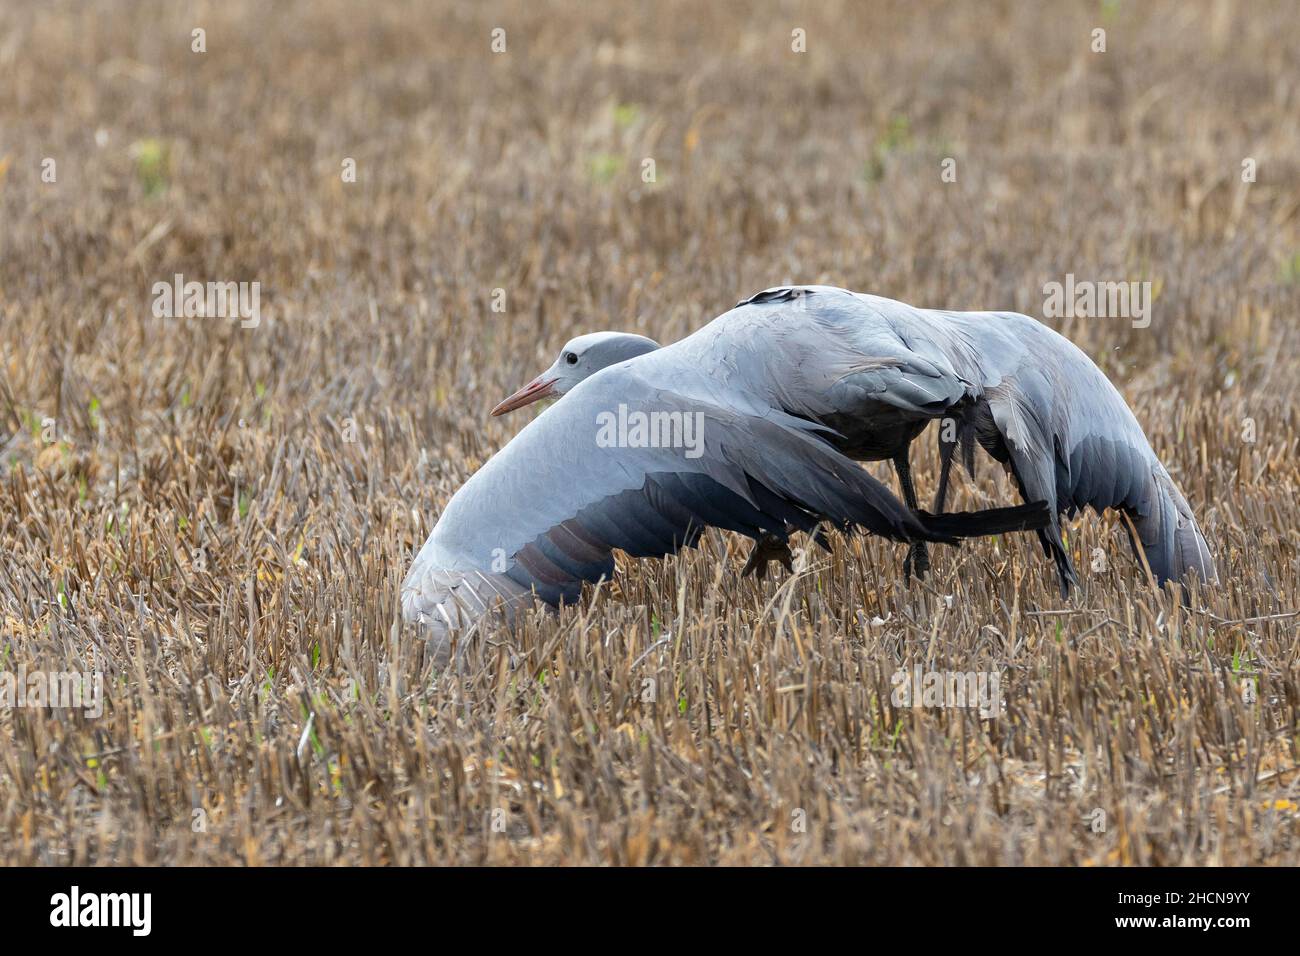 Blue Crane / Stanley Crane / Paradise Crane (Anthropoides paradiseus) adopting a low profile defensive pose while we freed the mate from a farm fence, Stock Photo